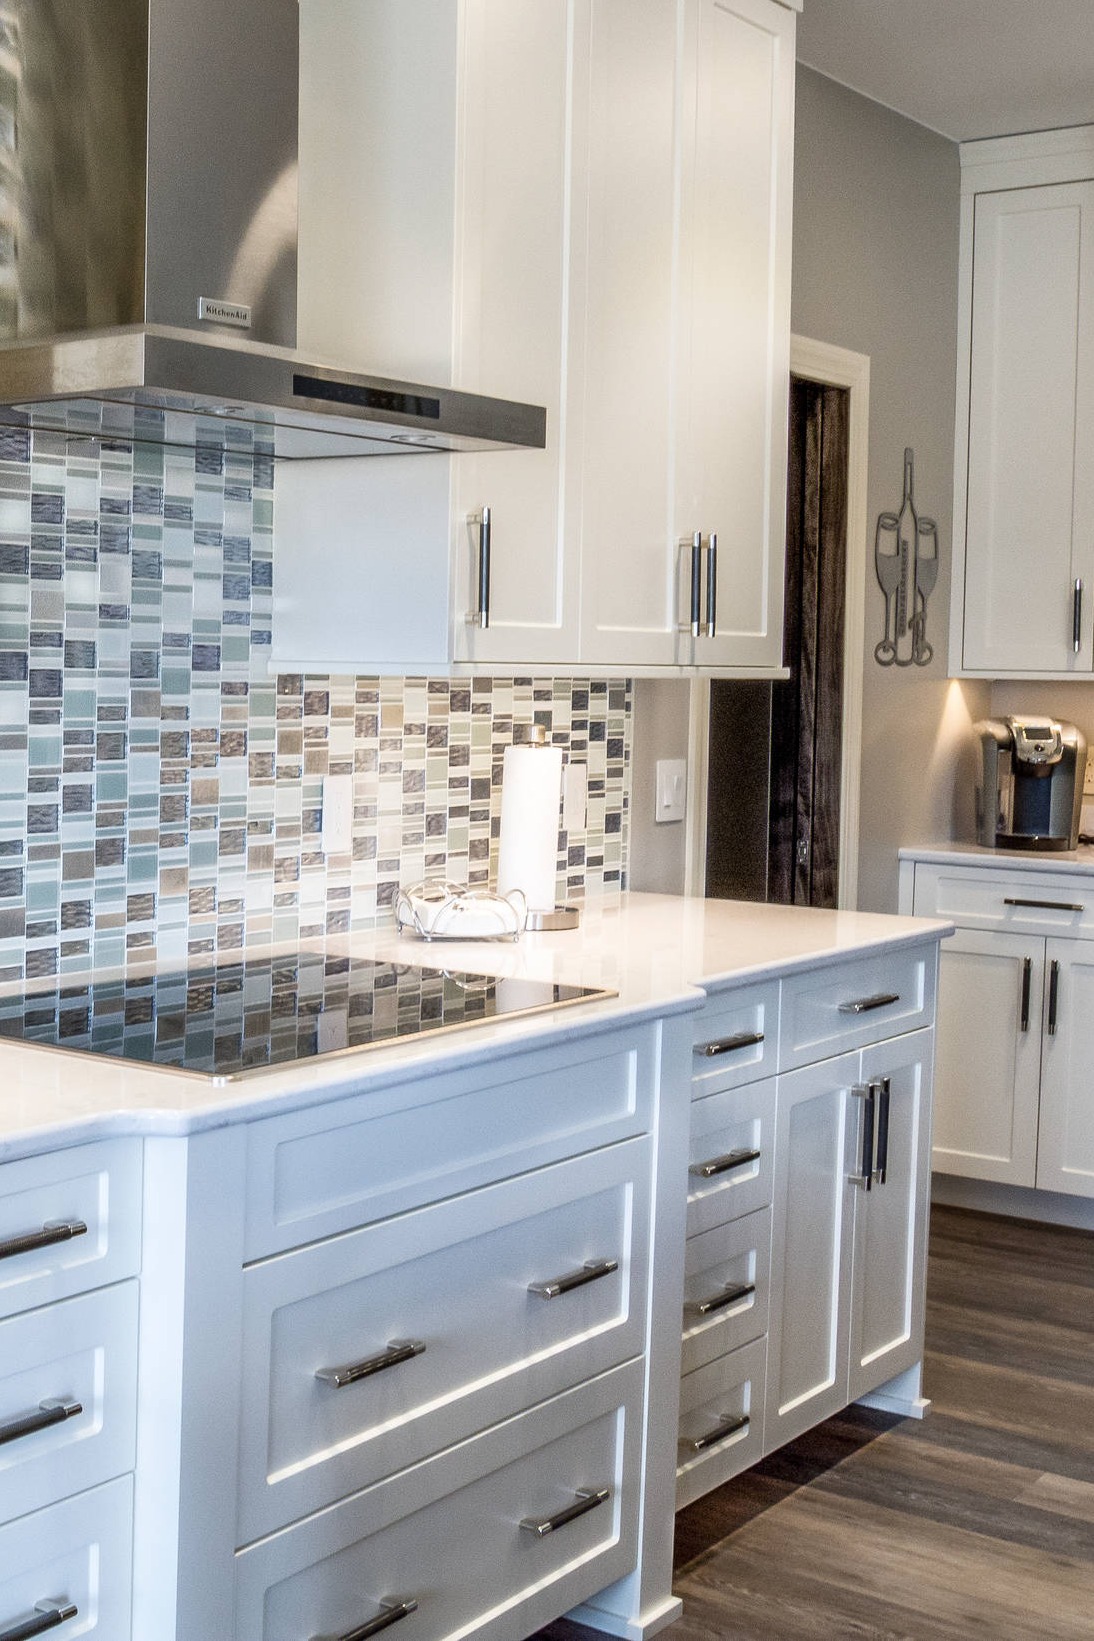 White Countertops With Cabinets, What Tile Looks Good With White Cabinets